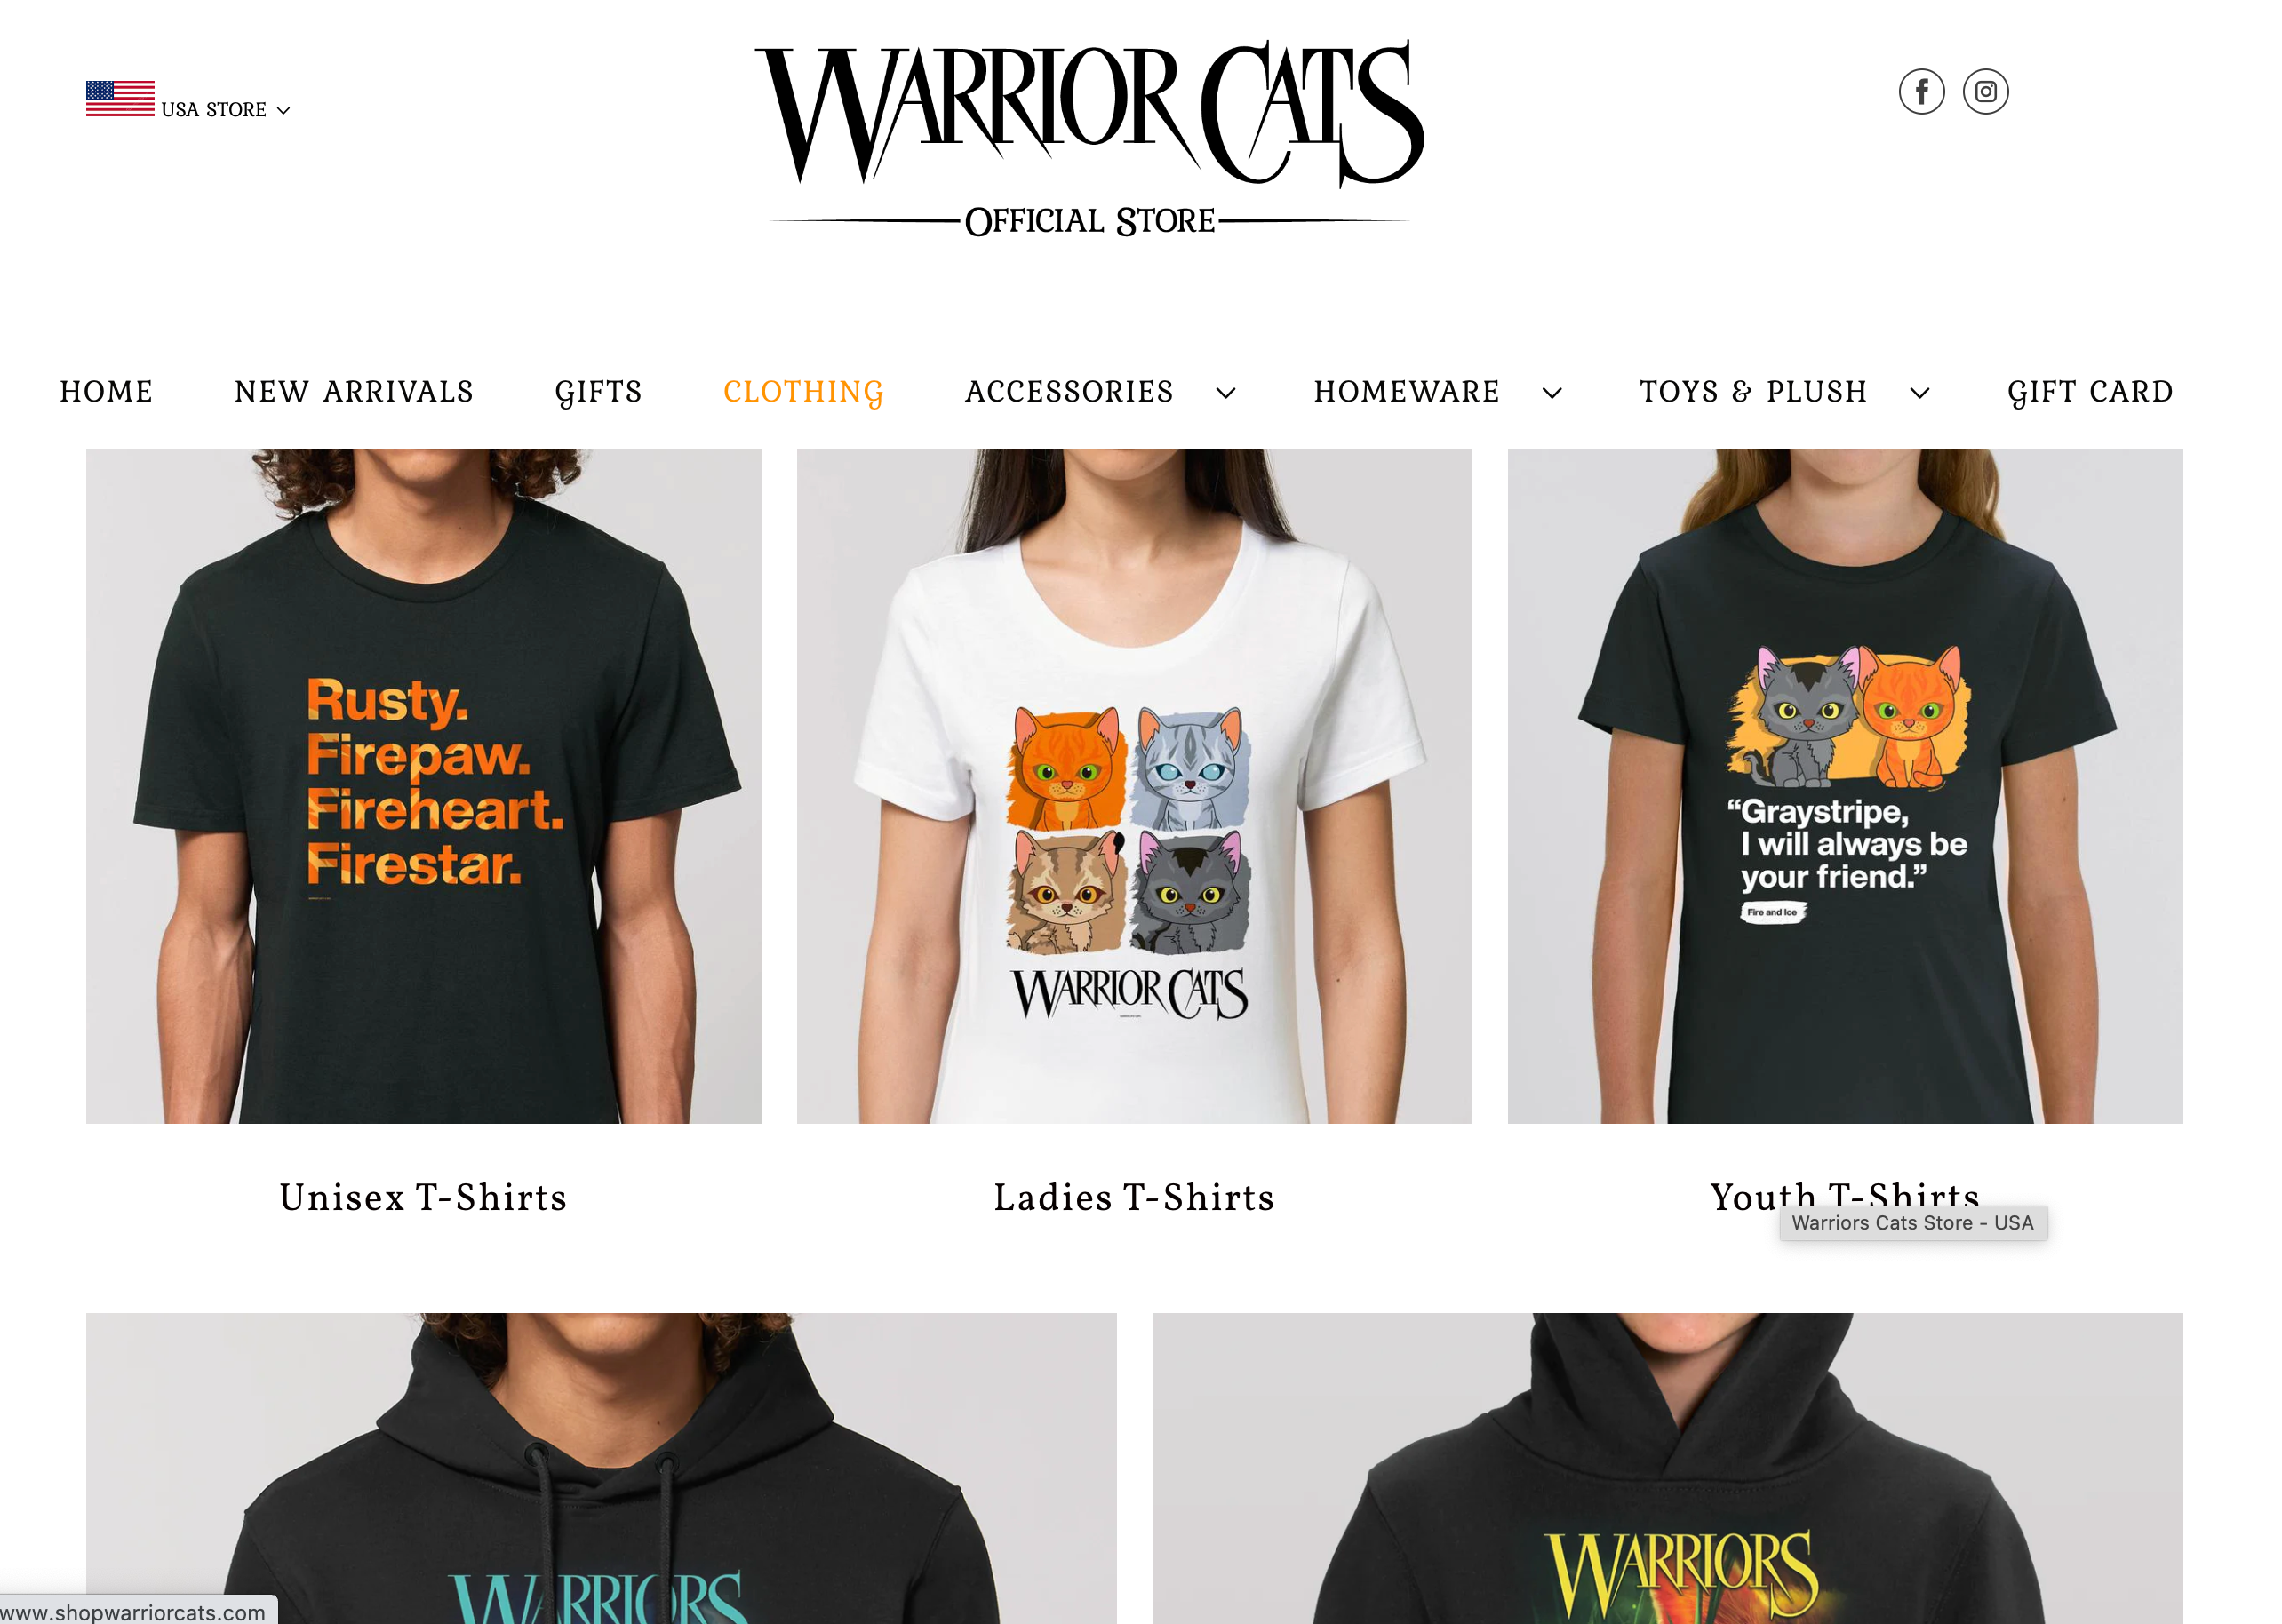 Expanding Possibilities: rgbCOMMERCE Empowers Warrior Cats and Other High-Profile Brands with Print-on-Demand Merchandise